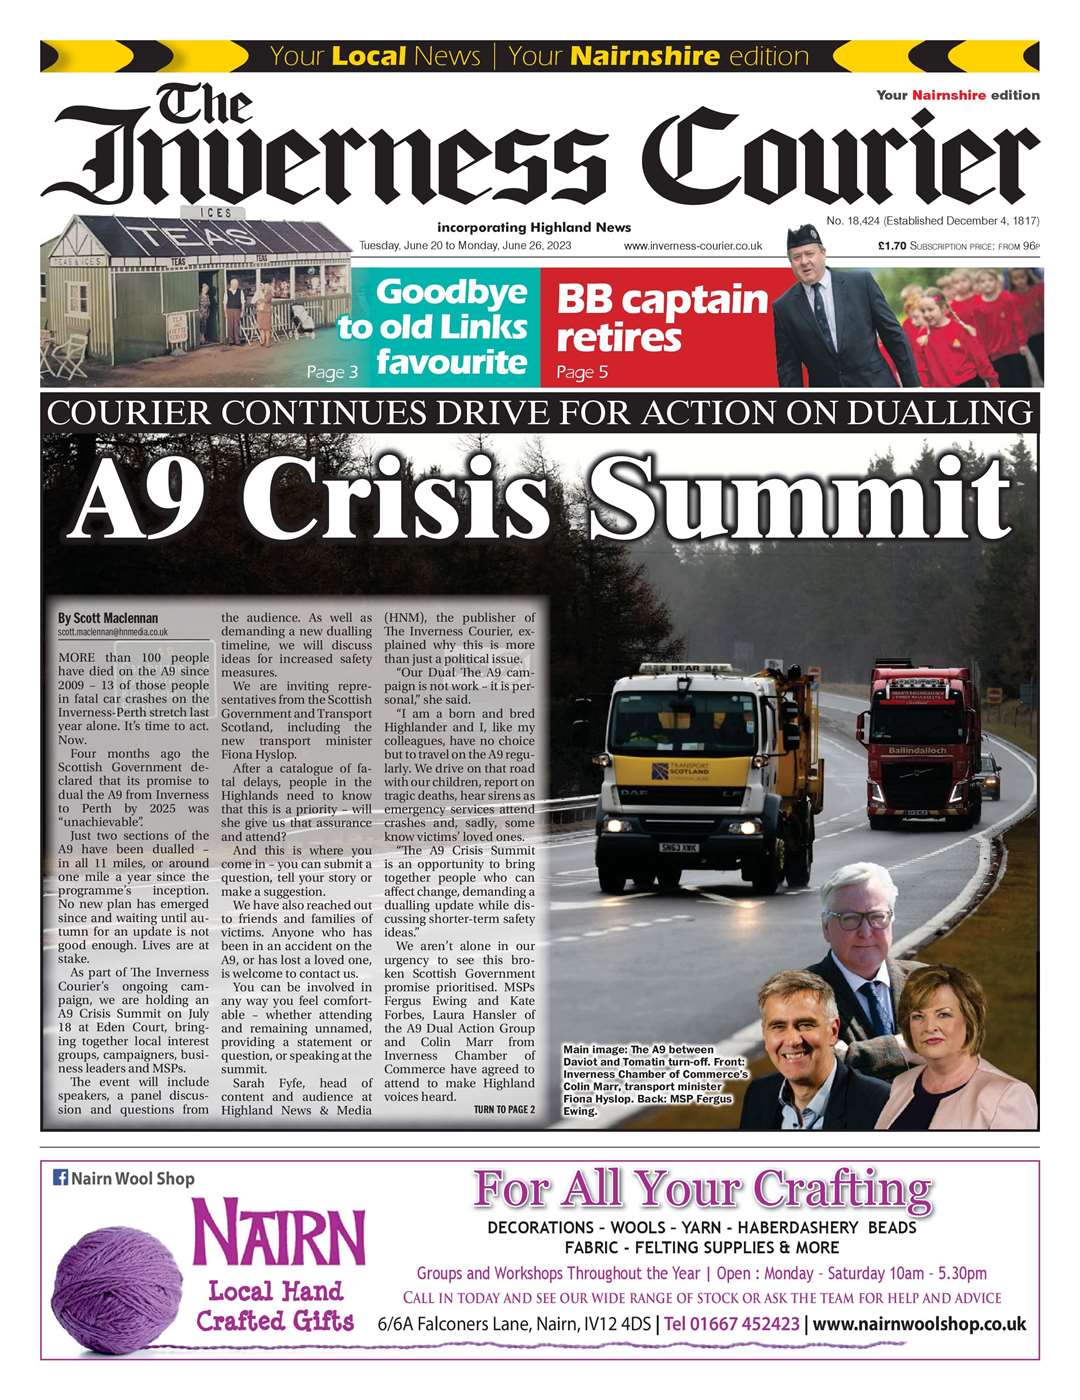 The Inverness Courier (Nairnshire edition), June 20, front page.